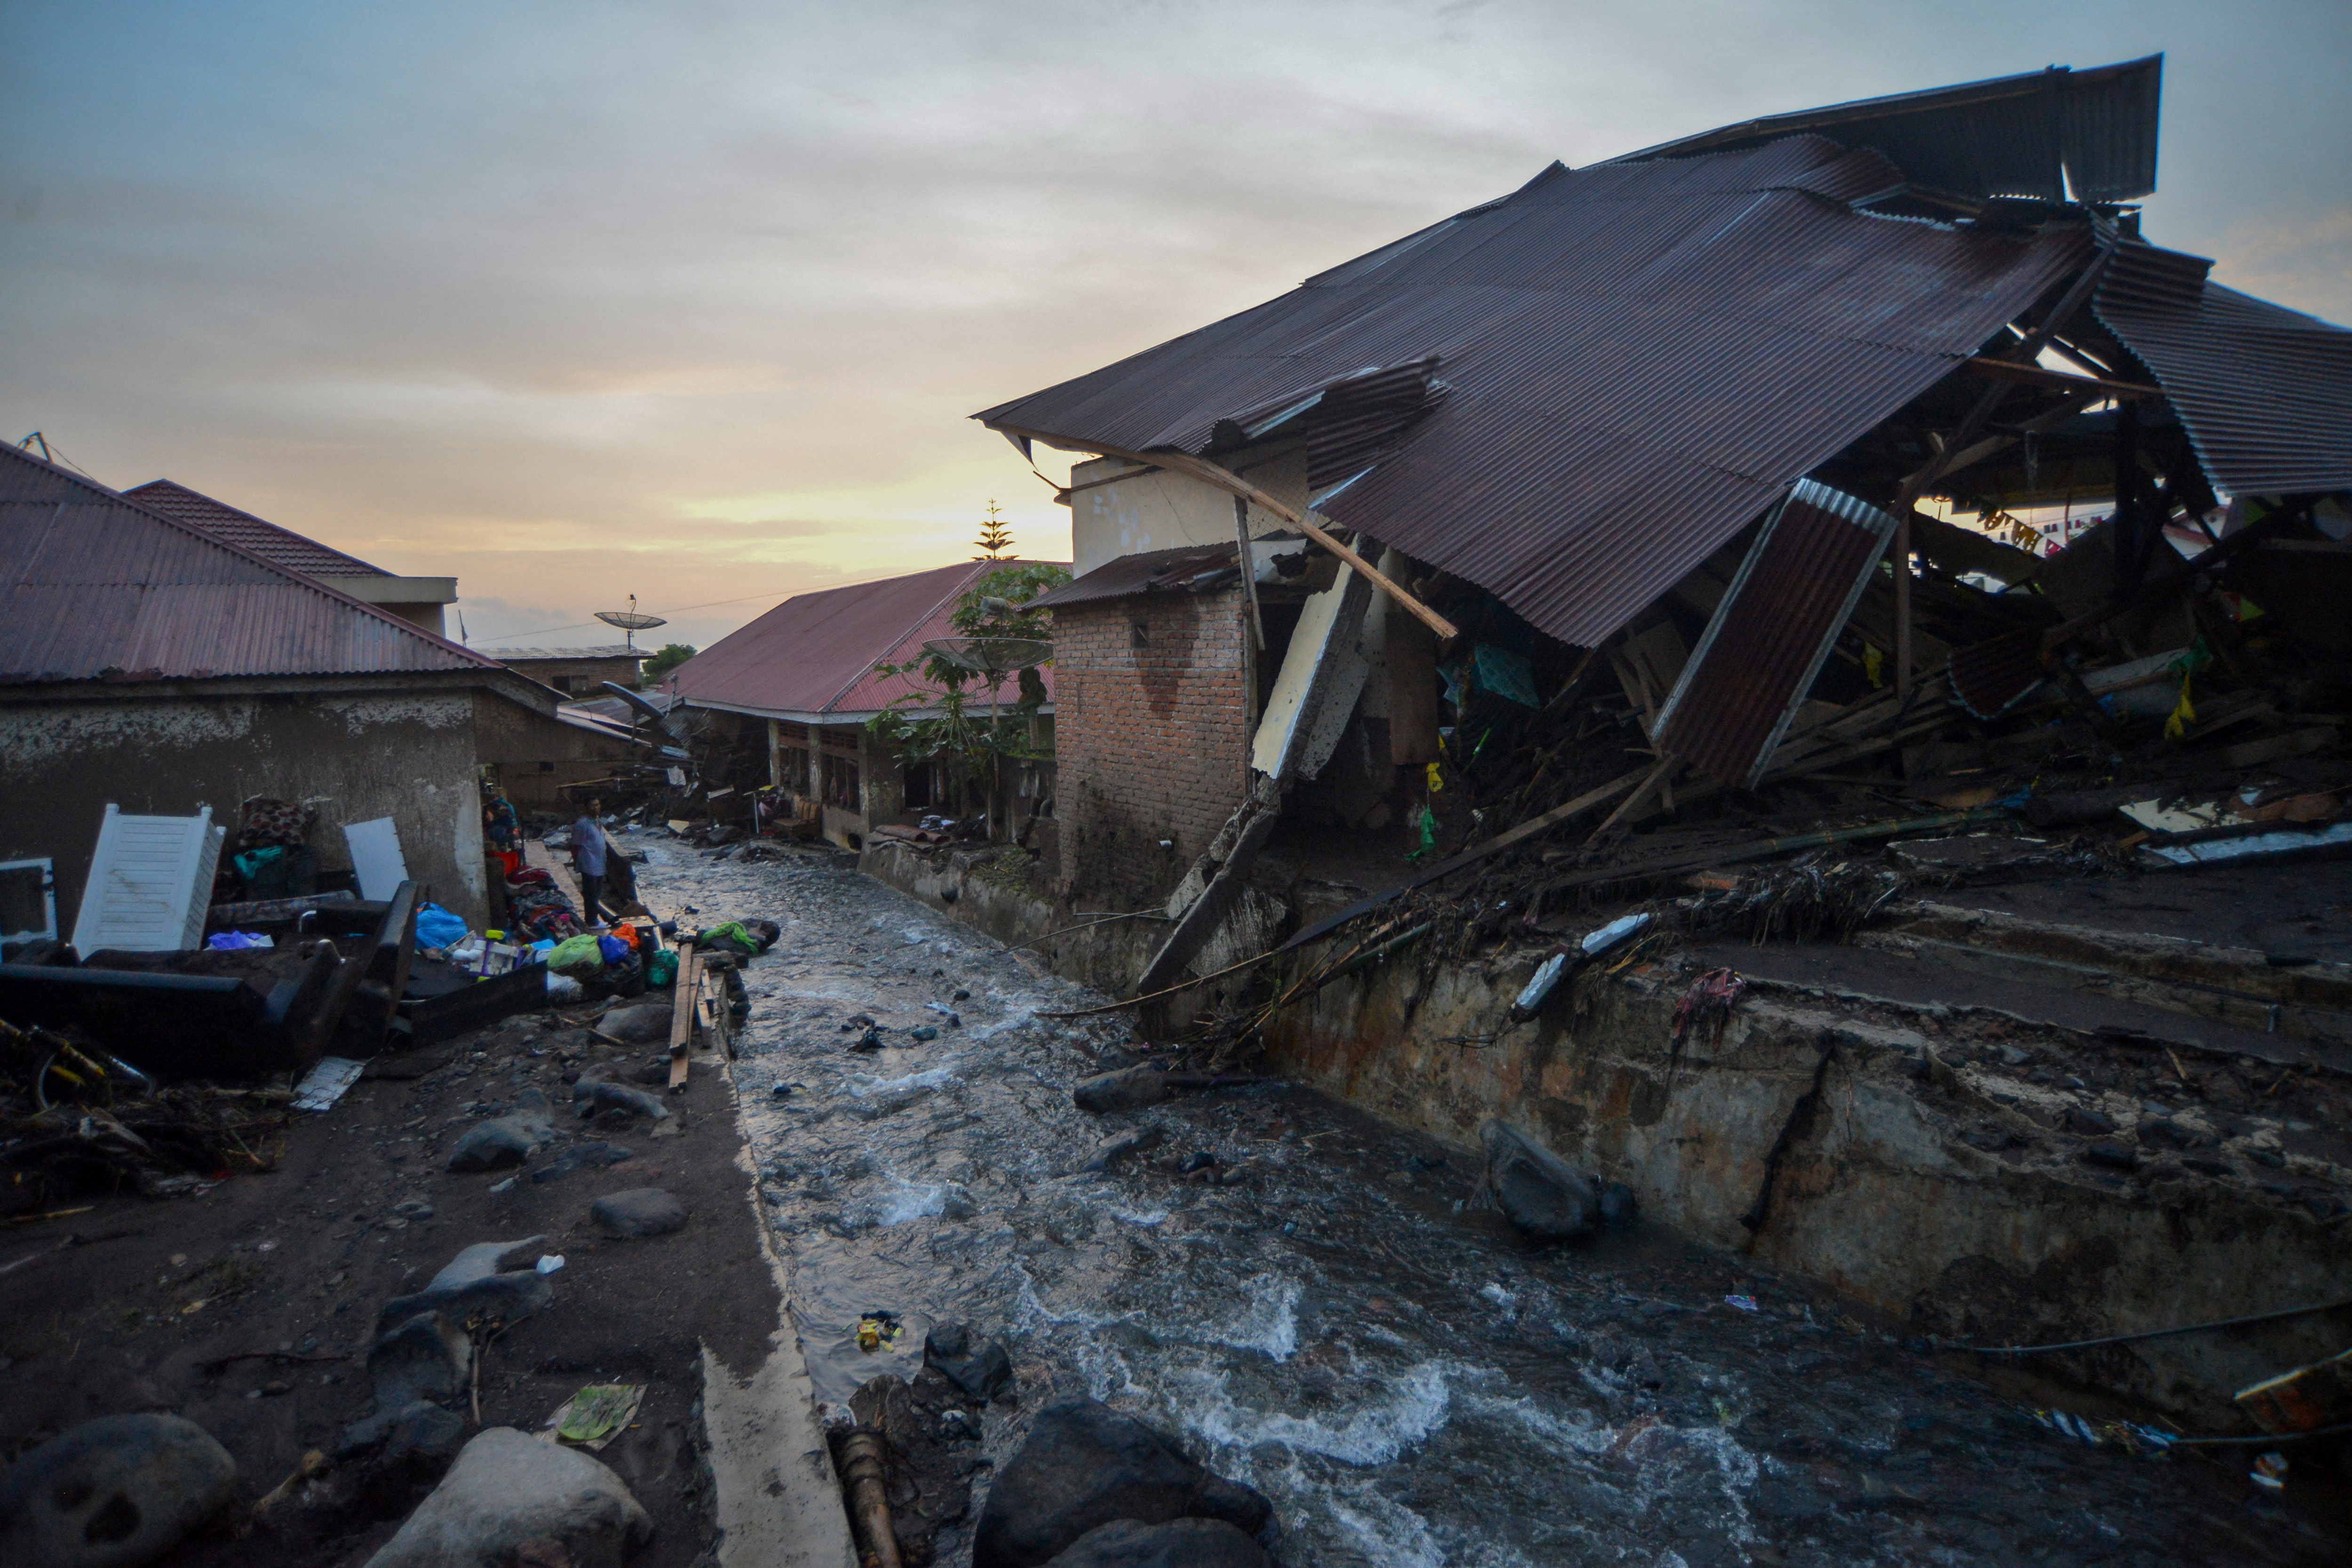 A damaged house is seen in an area affected by heavy rain which caused flash floods in Agam